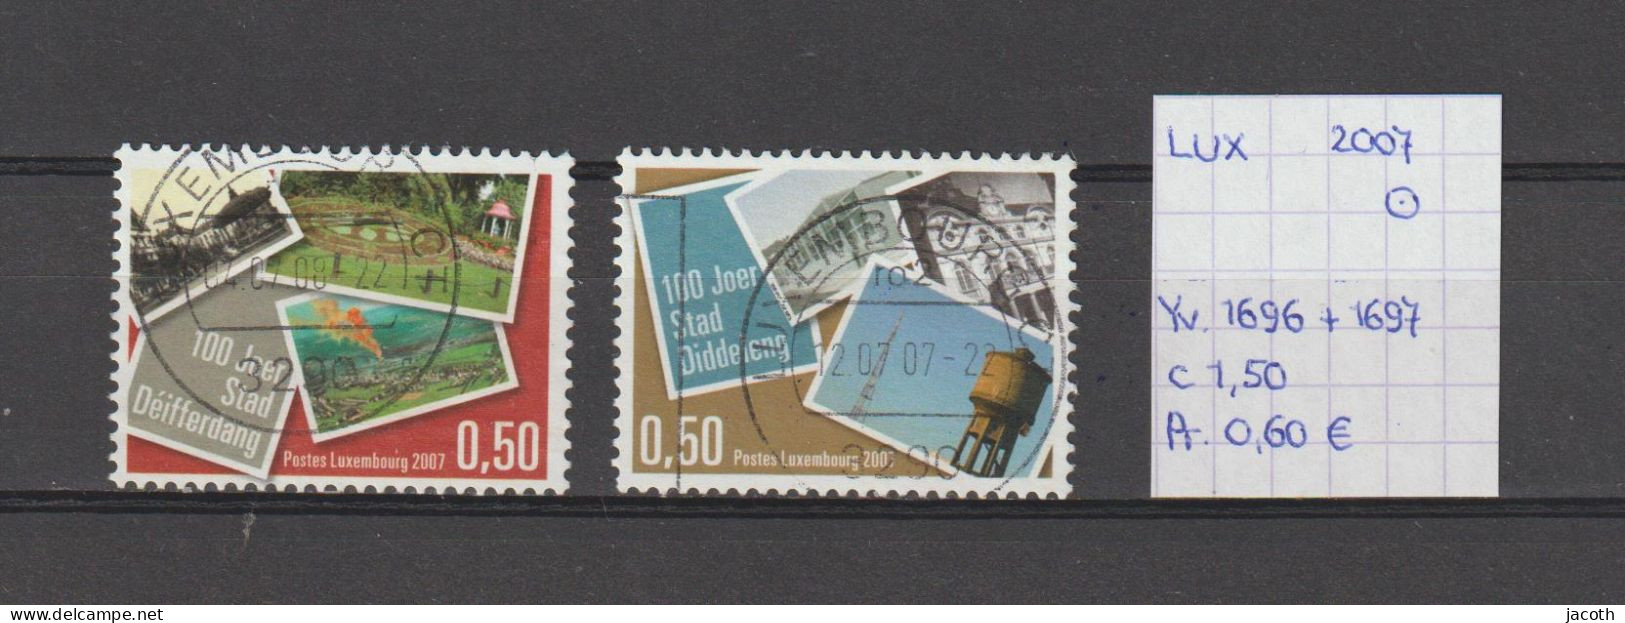 (TJ) Luxembourg 2007 - YT 1696 + 1697 (gest./obl./used) - Usati